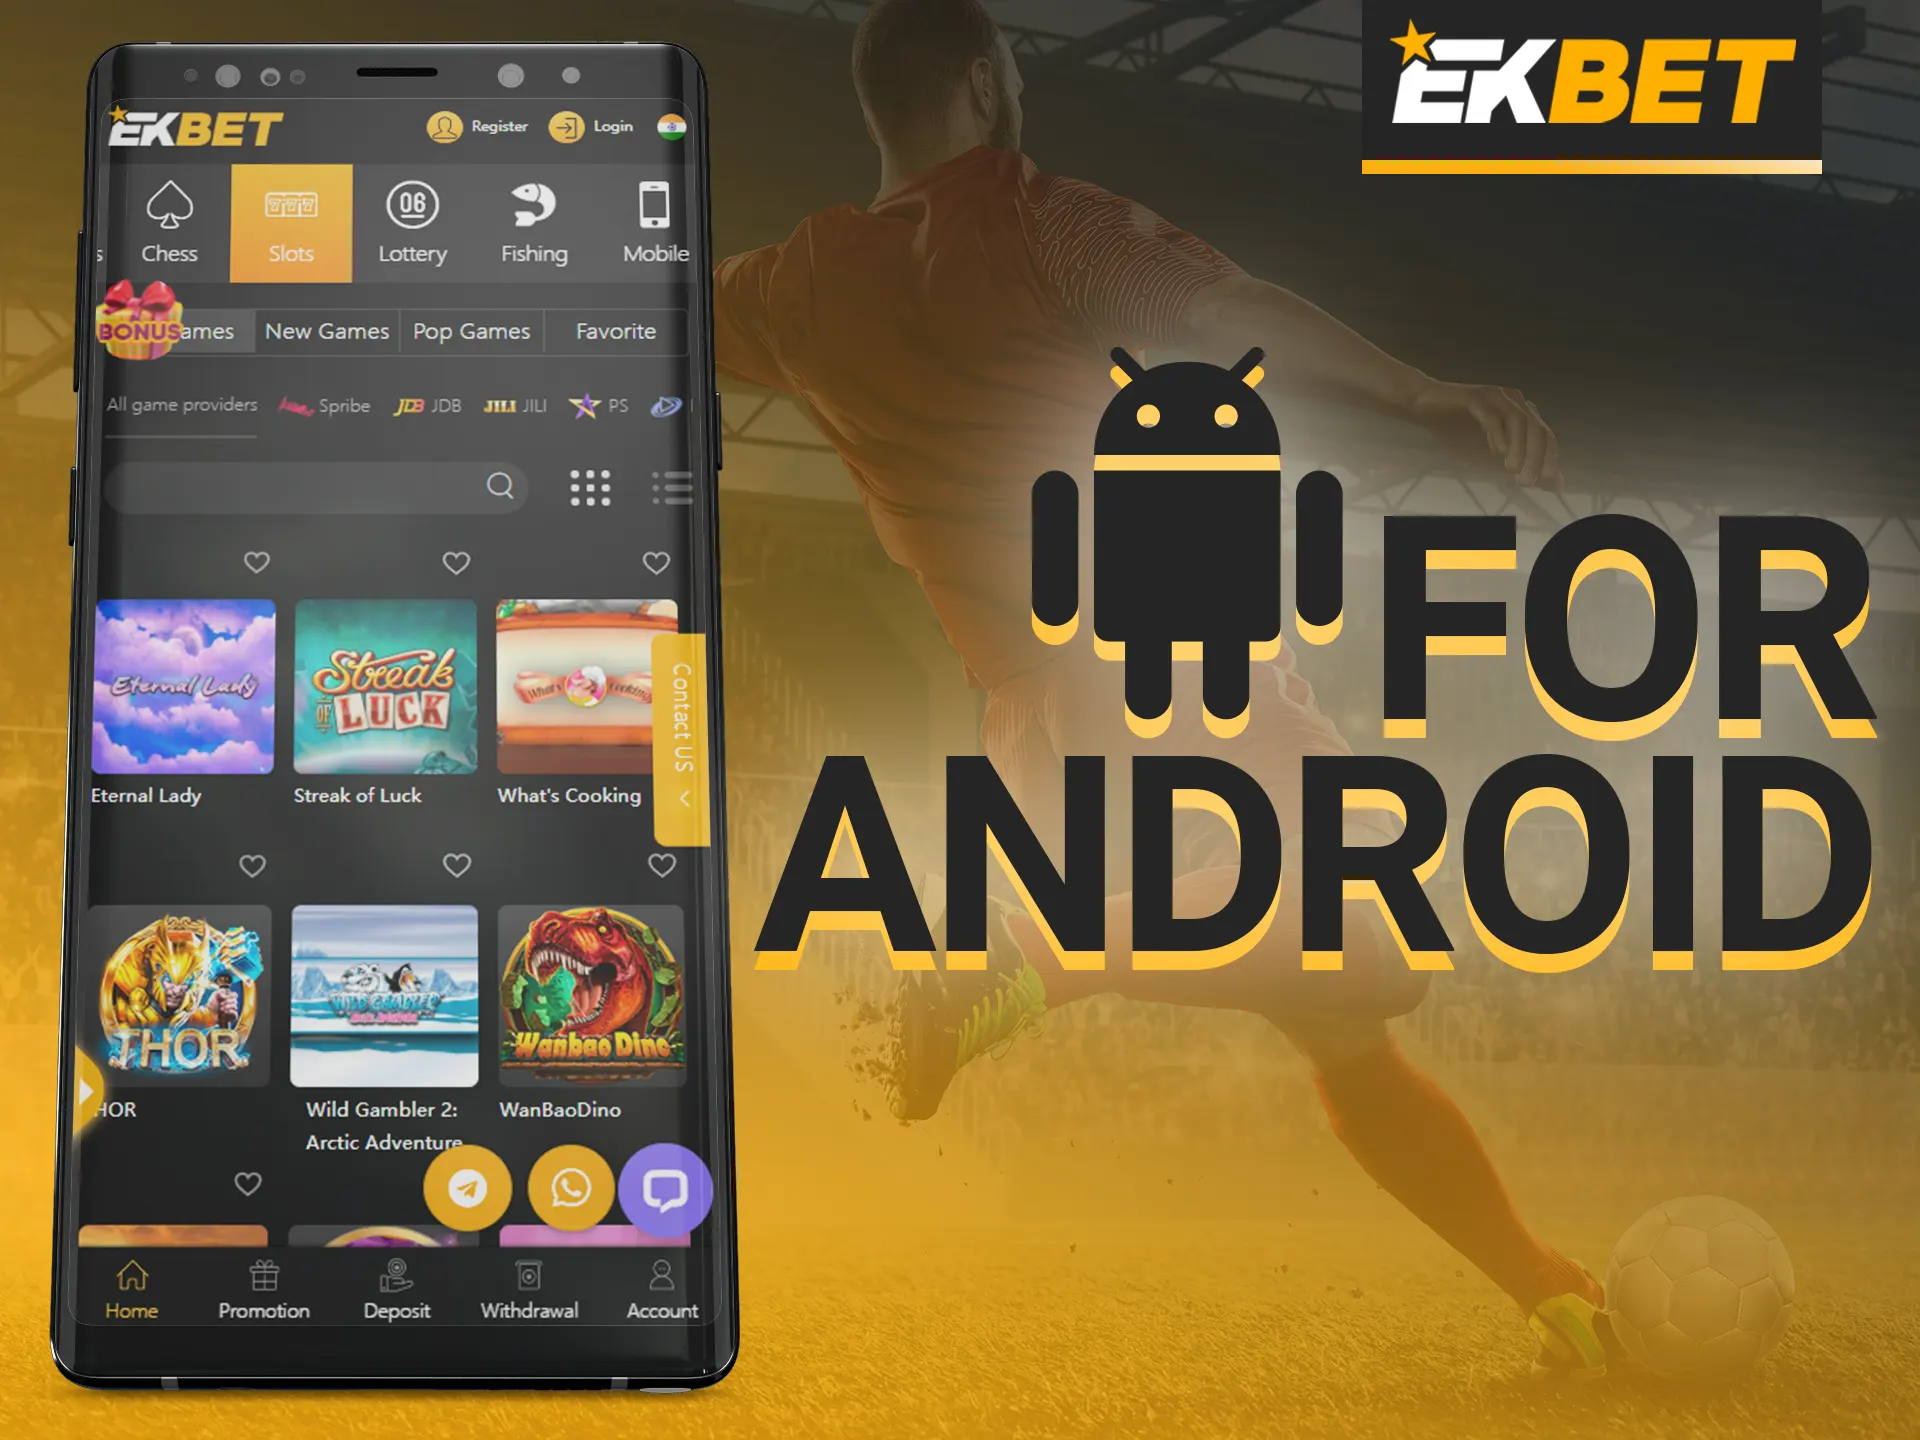 Download and install the EKbet mobile app for Android.